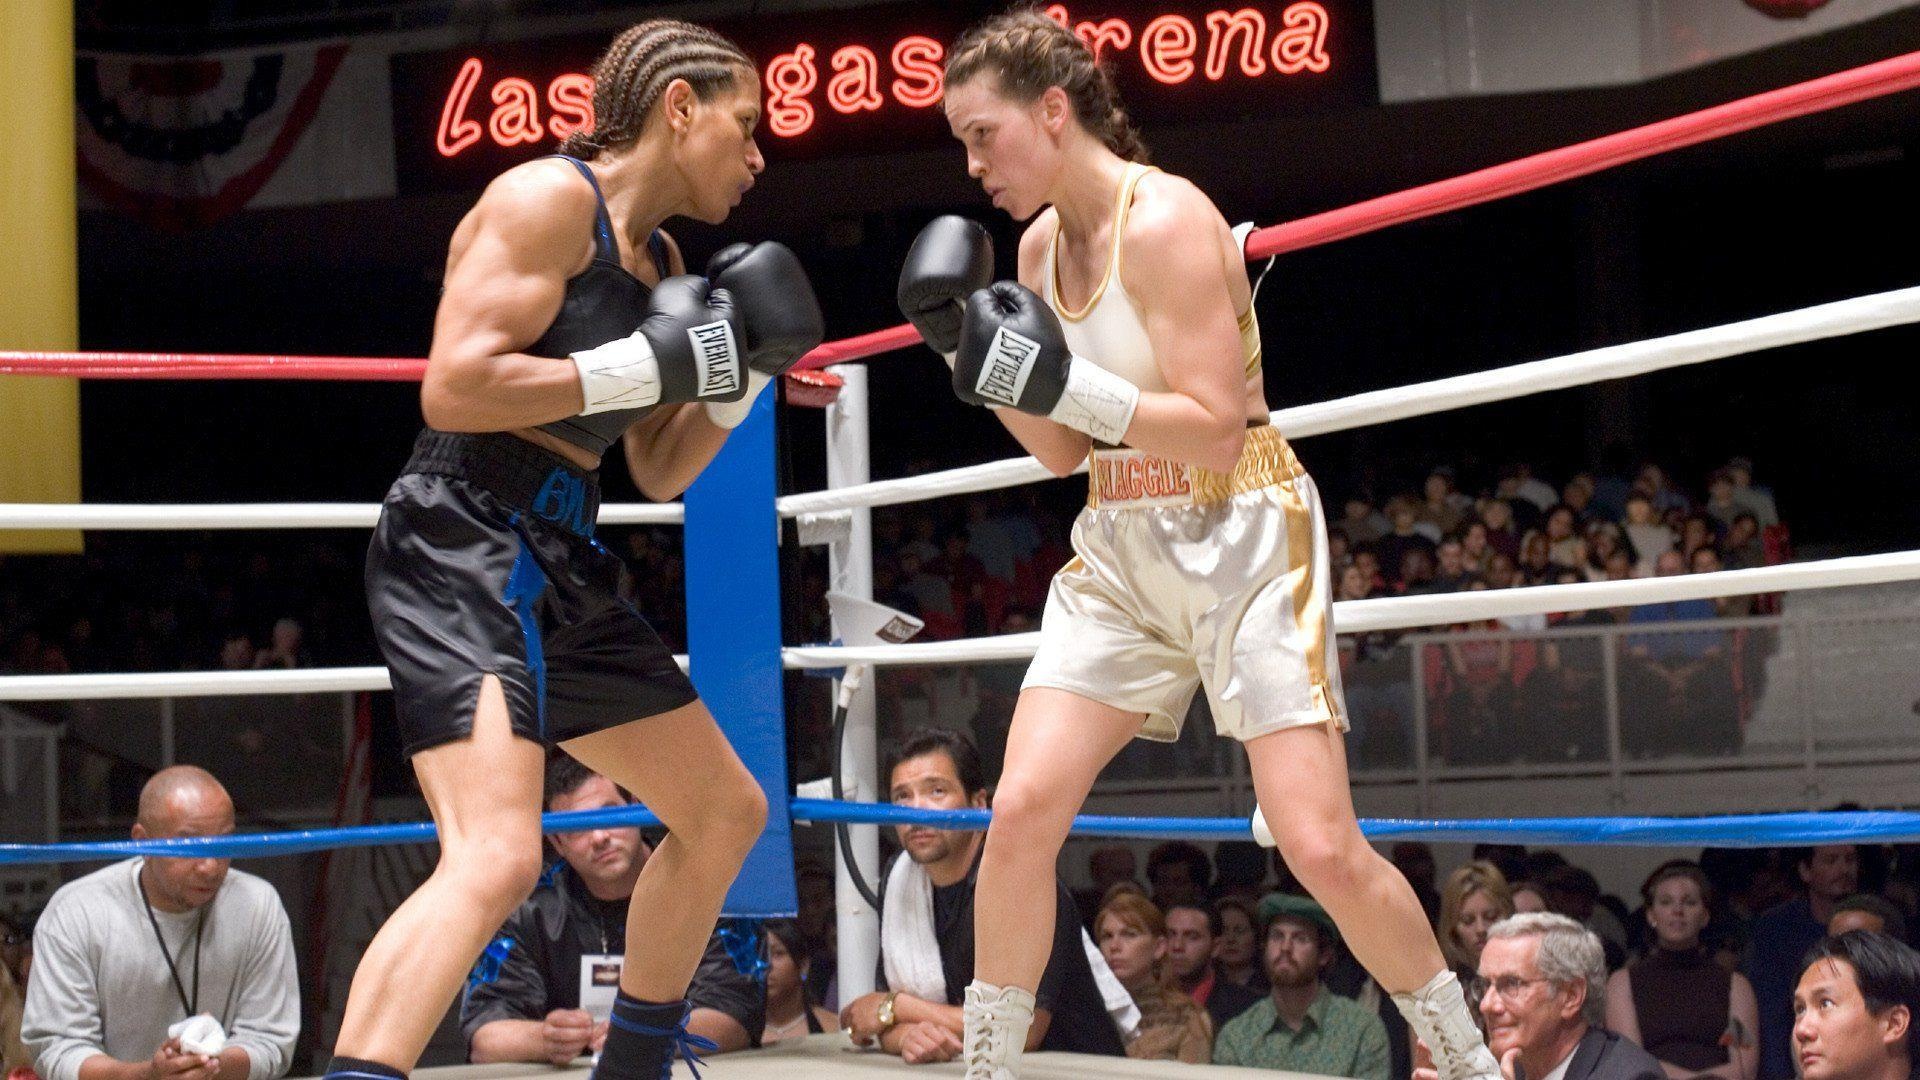 Million Dollar Baby: The film garnered seven nominations at the 77th Academy Awards. 1920x1080 Full HD Wallpaper.